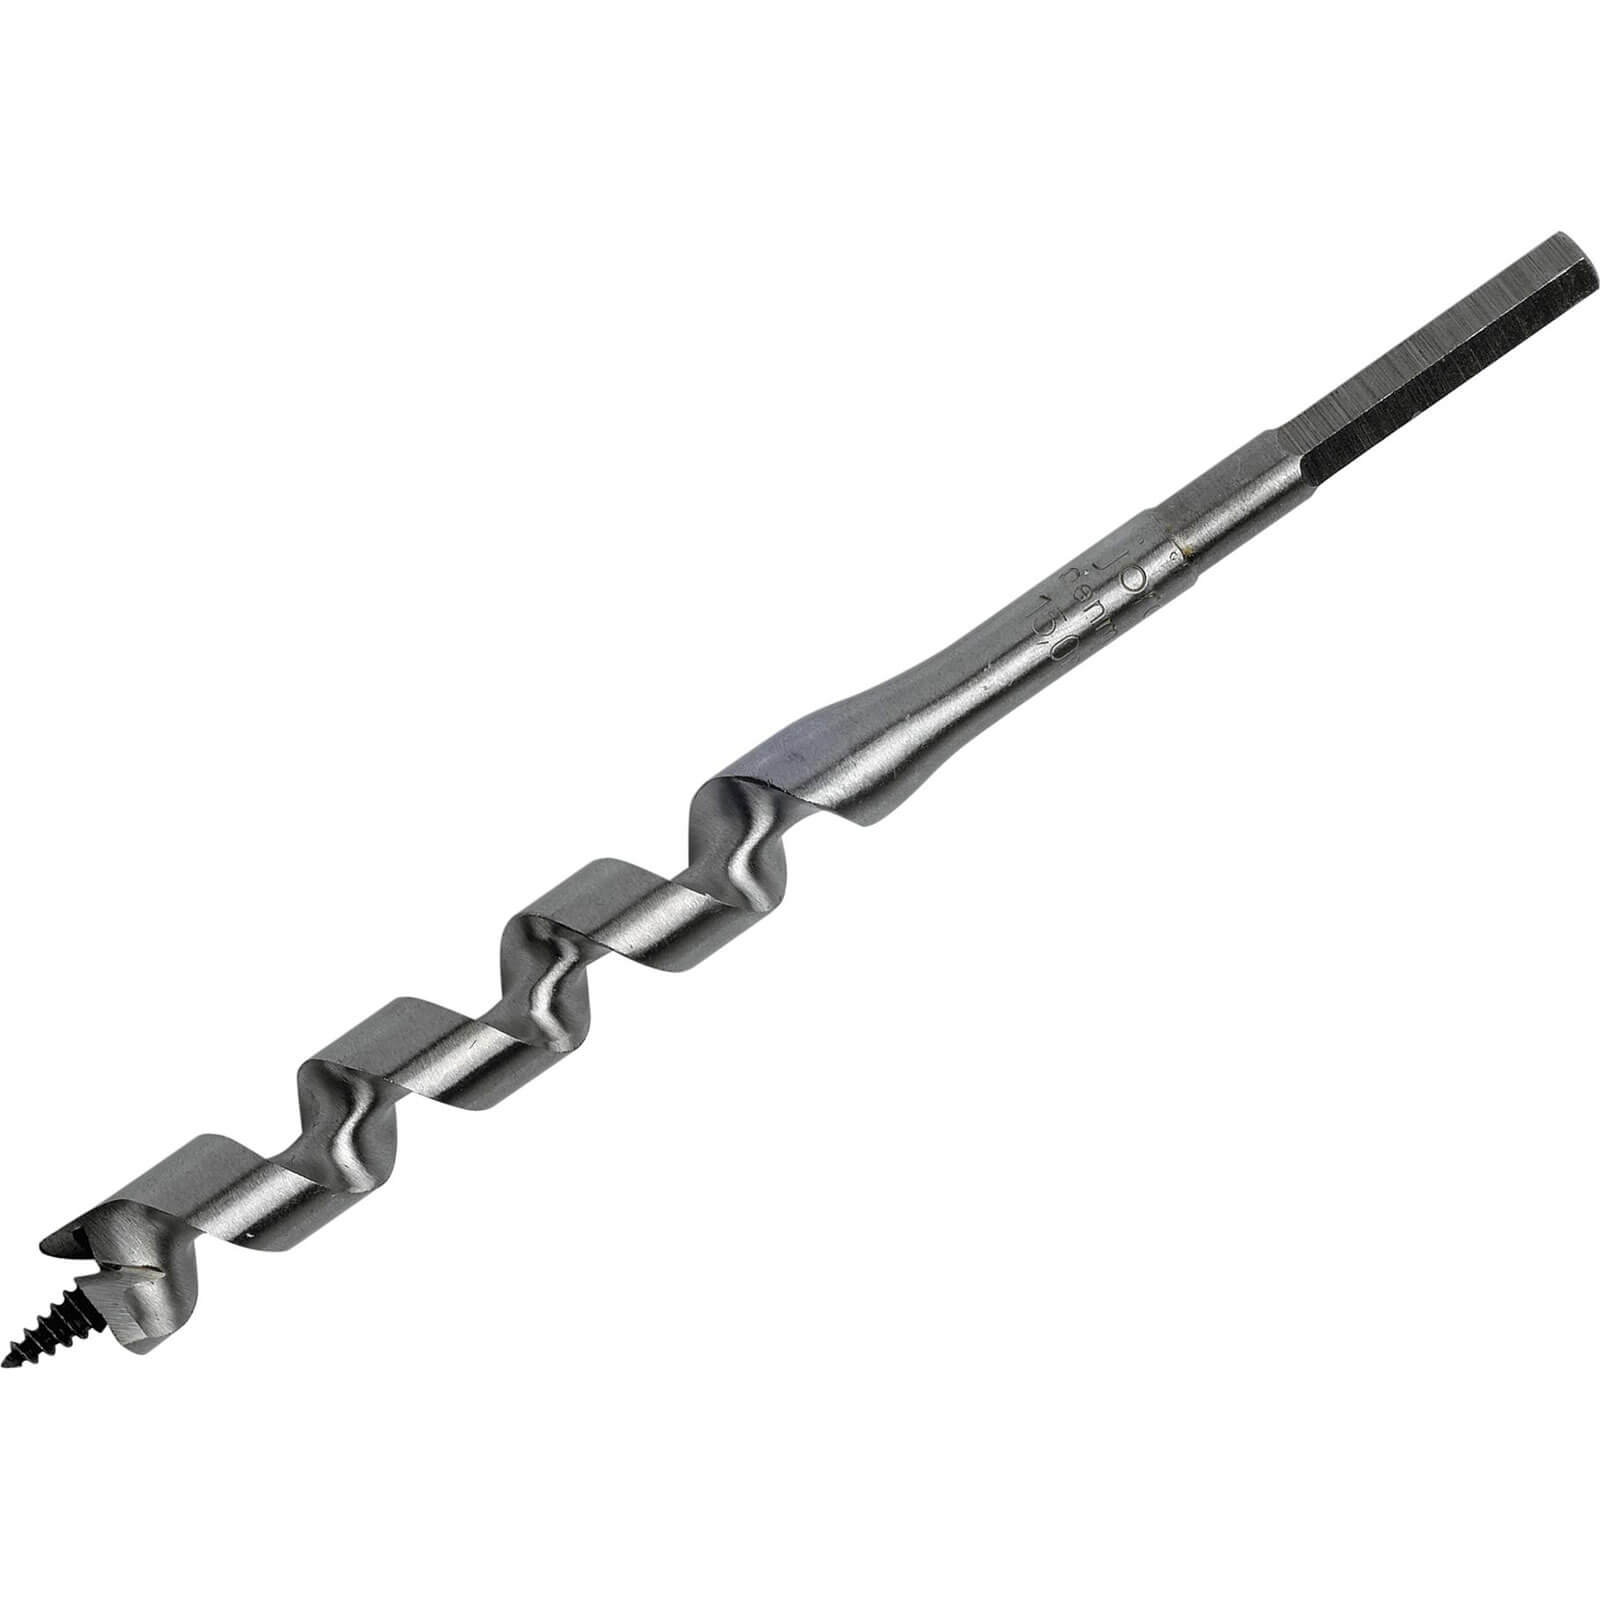 Image of Irwin Wood Auger Drill Bit 13mm 191mm